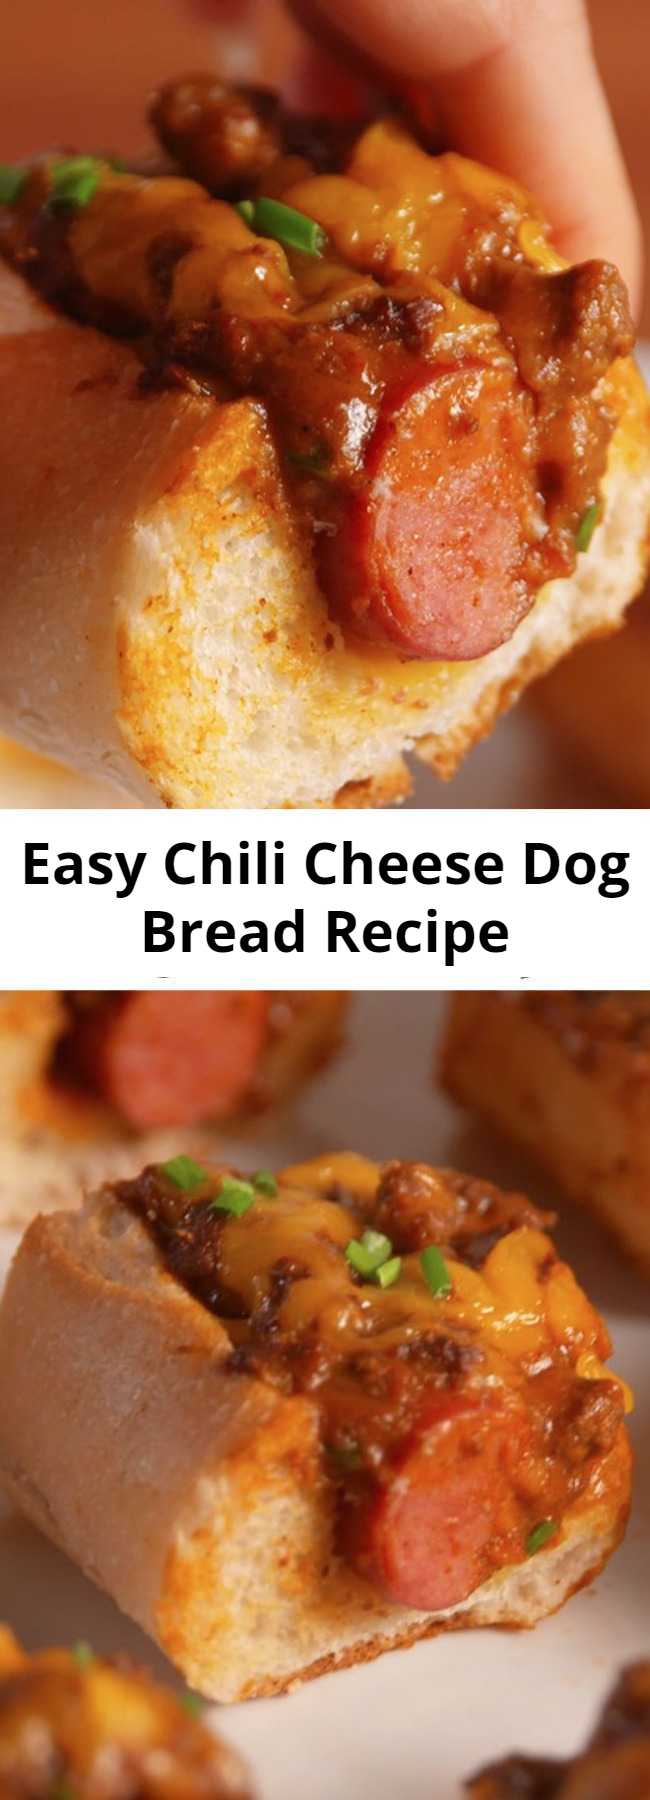 Easy Chili Cheese Dog Bread Recipe - Everyone's your BFF when you bring these to the party. This recipe will make you forget everything you thought you knew about chili cheese dogs. We're pretty confident this'll be gobbled right up.